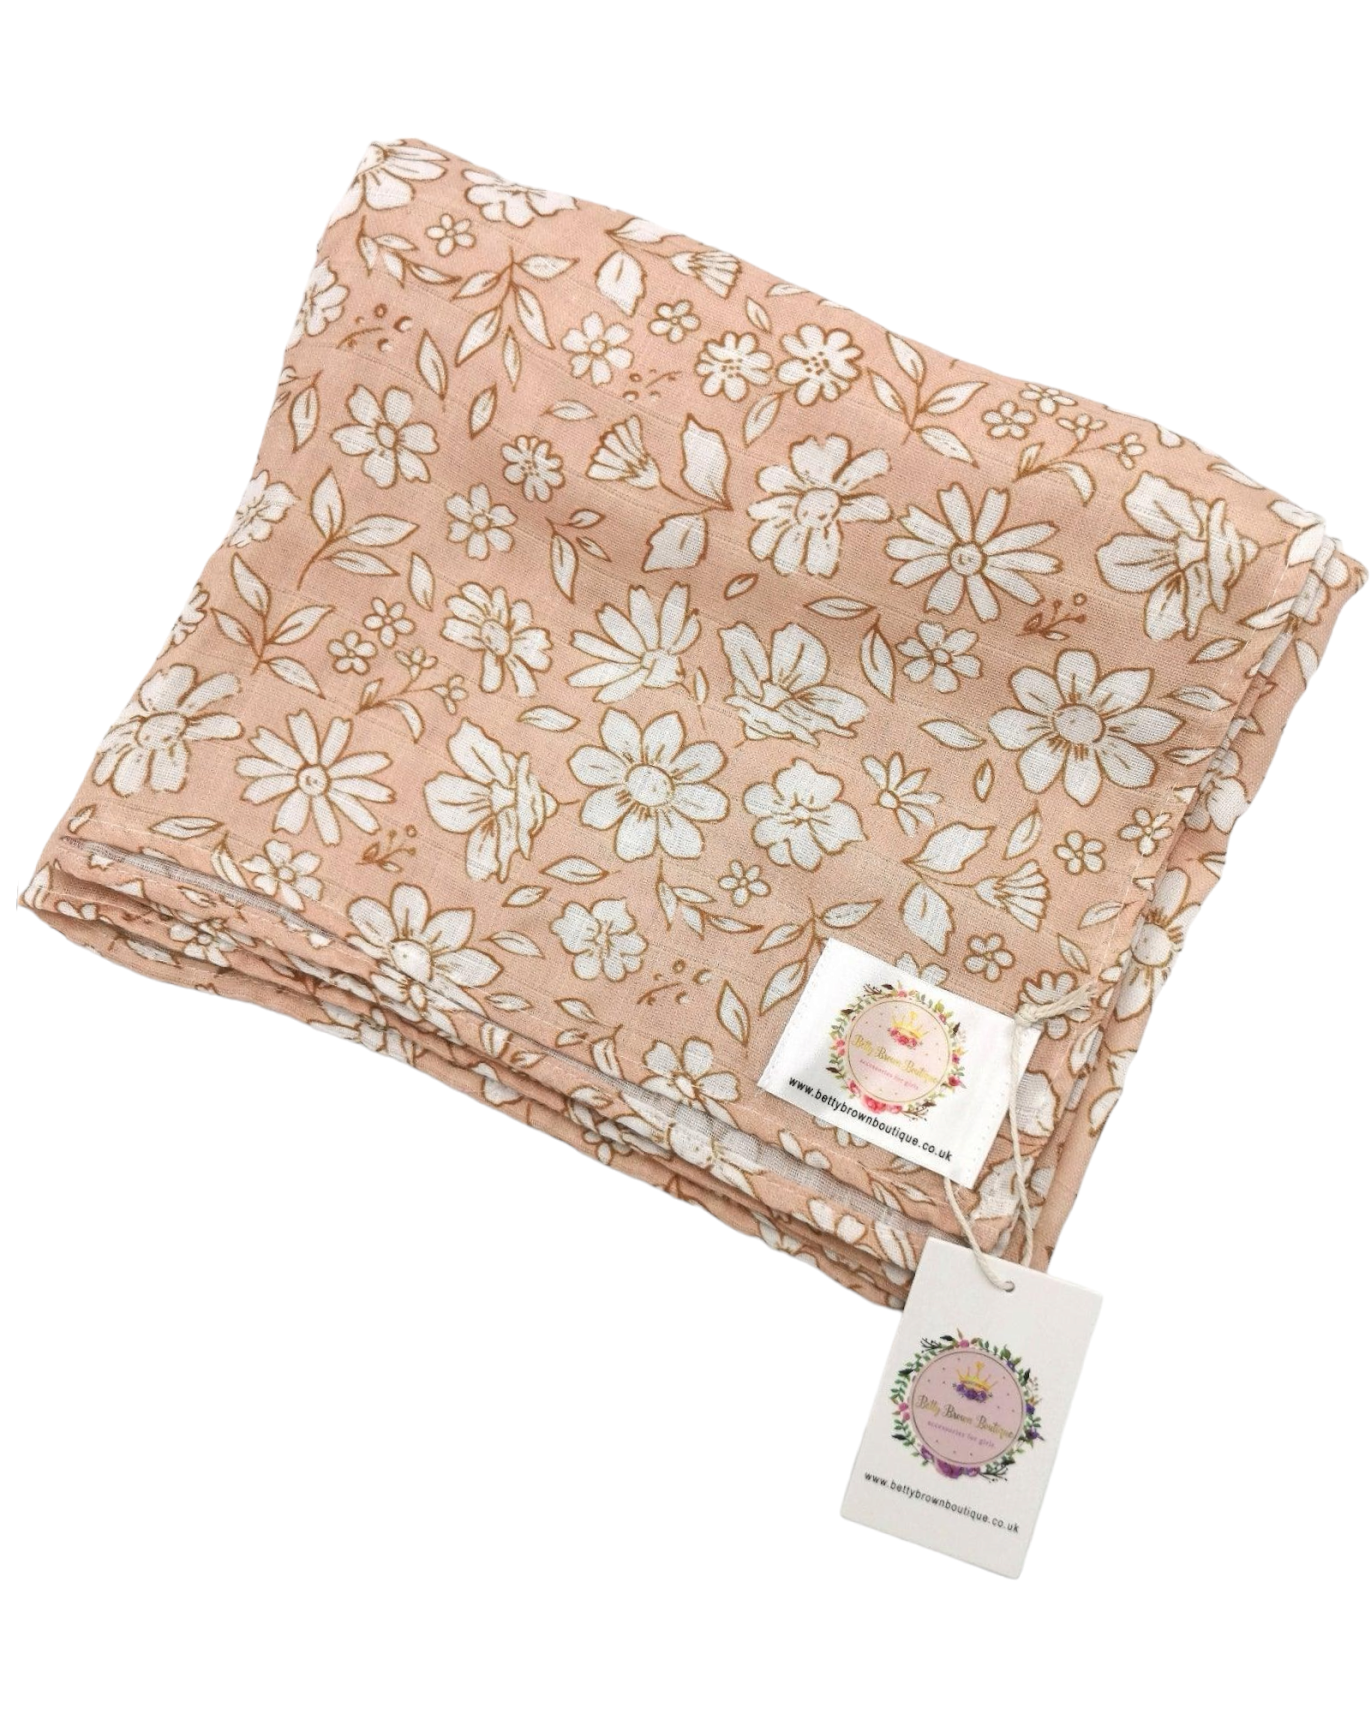 Large Cappuccino Floral Muslin Swaddle blanket - Betty Brown Boutique Ltd